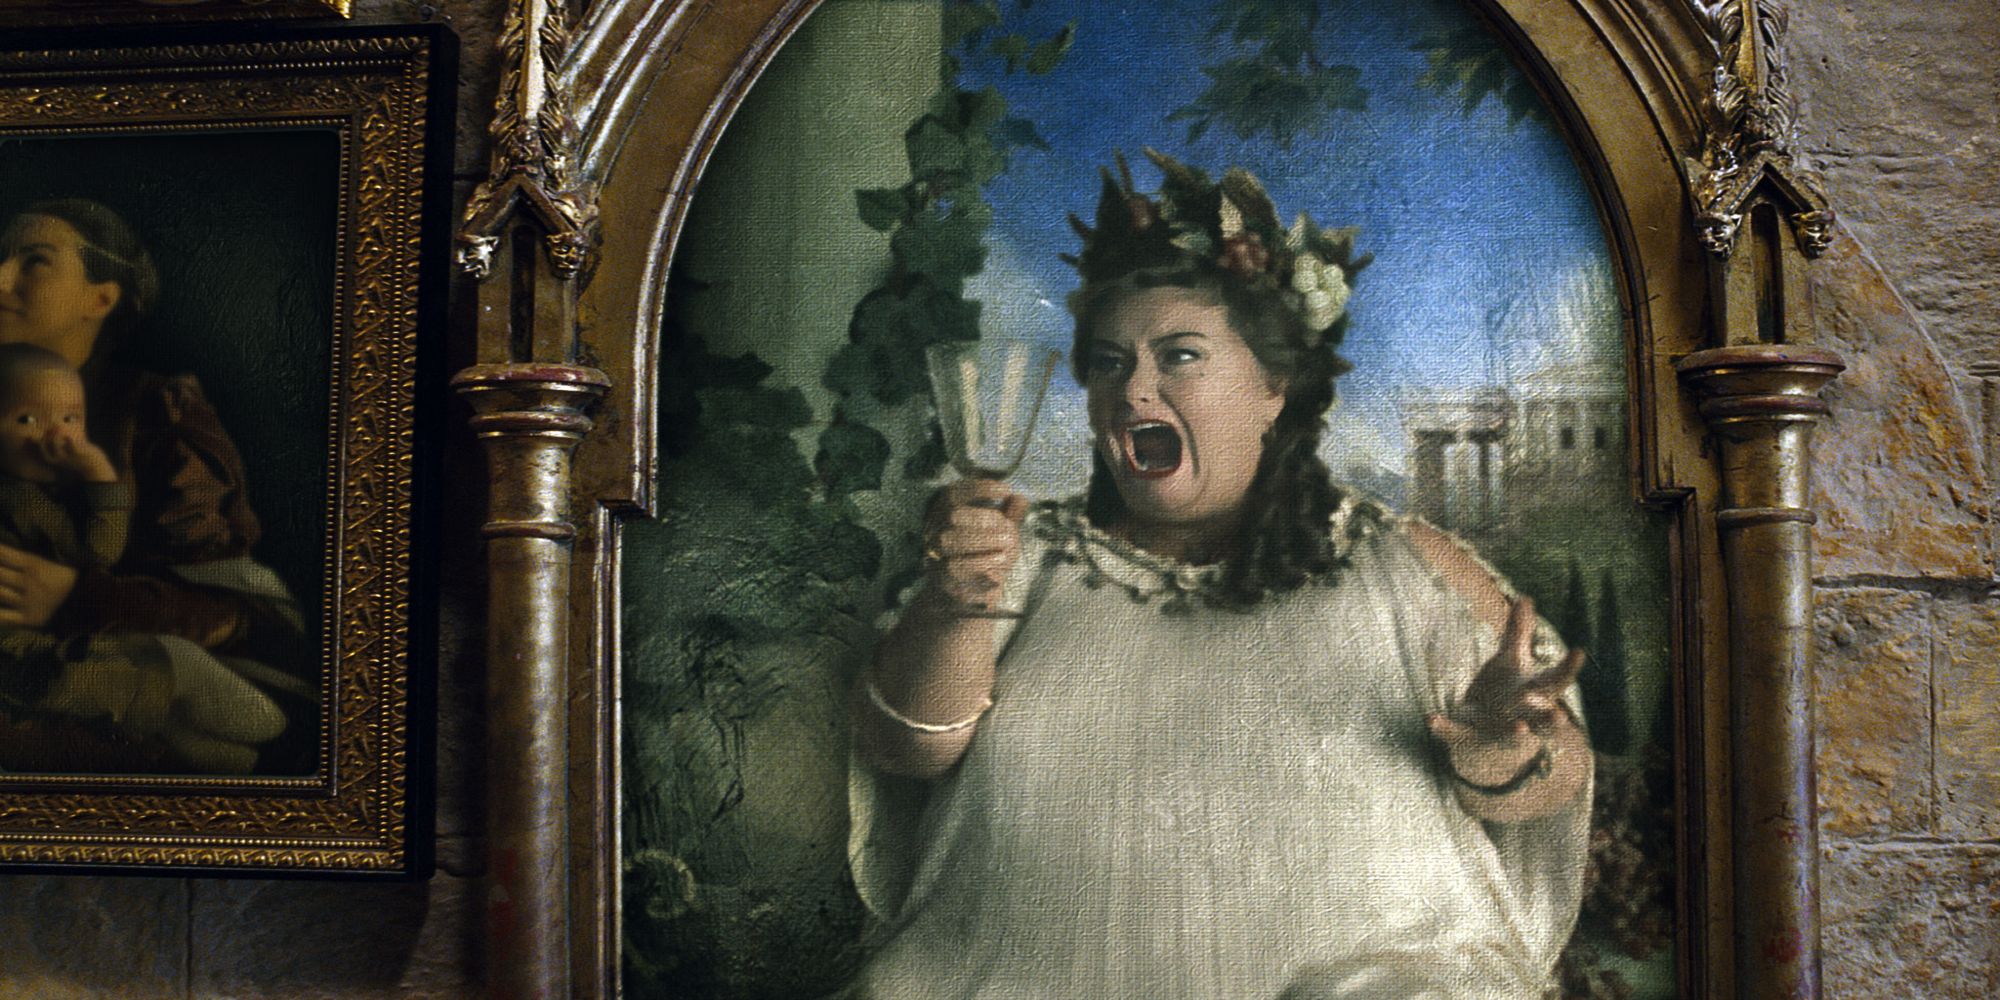 The Fat Lady portrait from the Harry Potter movie series.